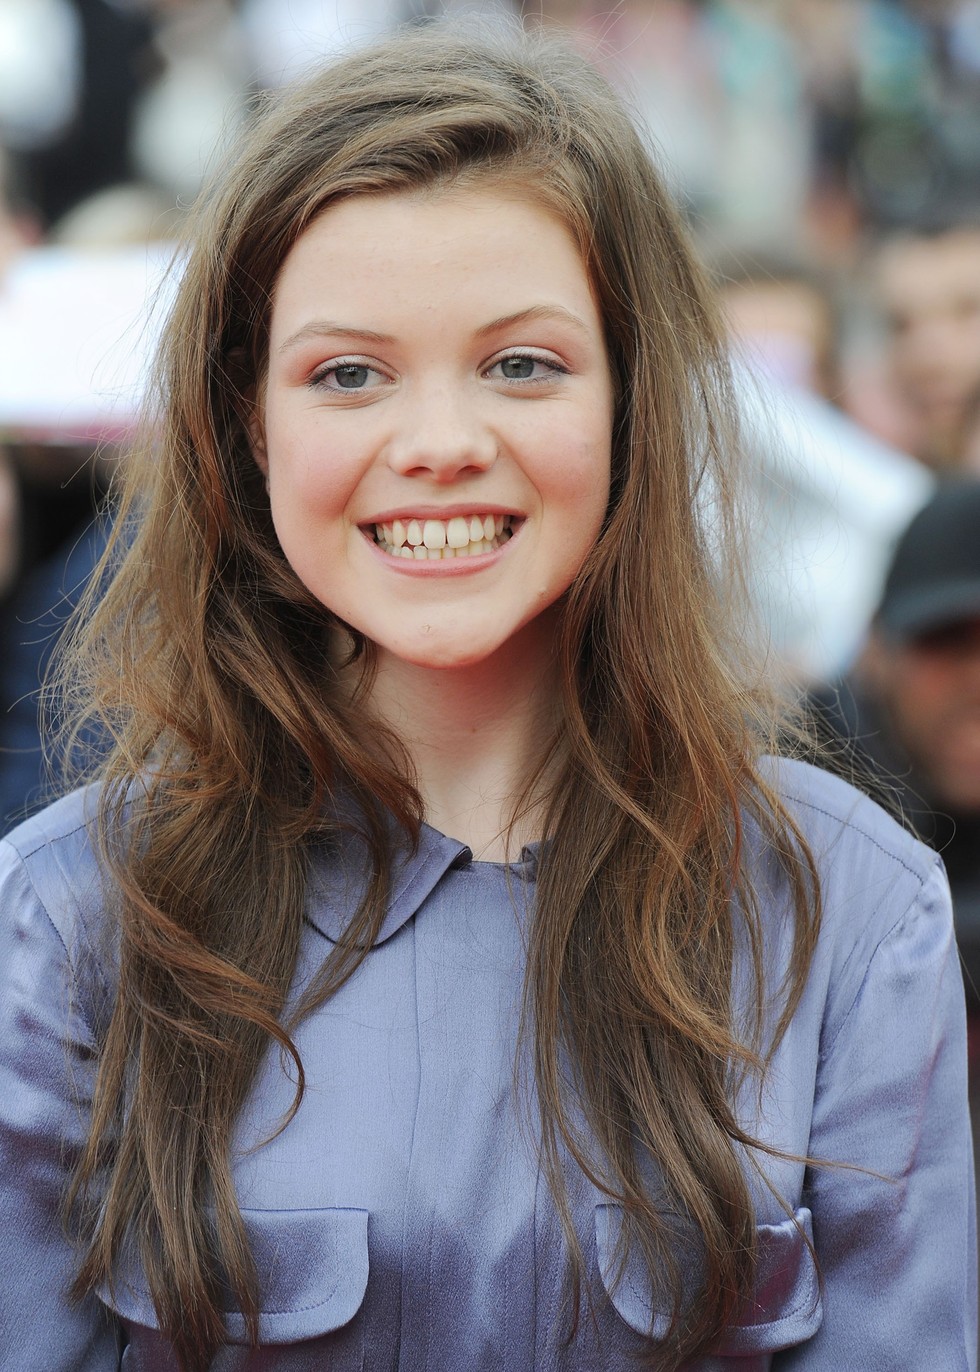 Naked georgie henley TheFappening: Georgie